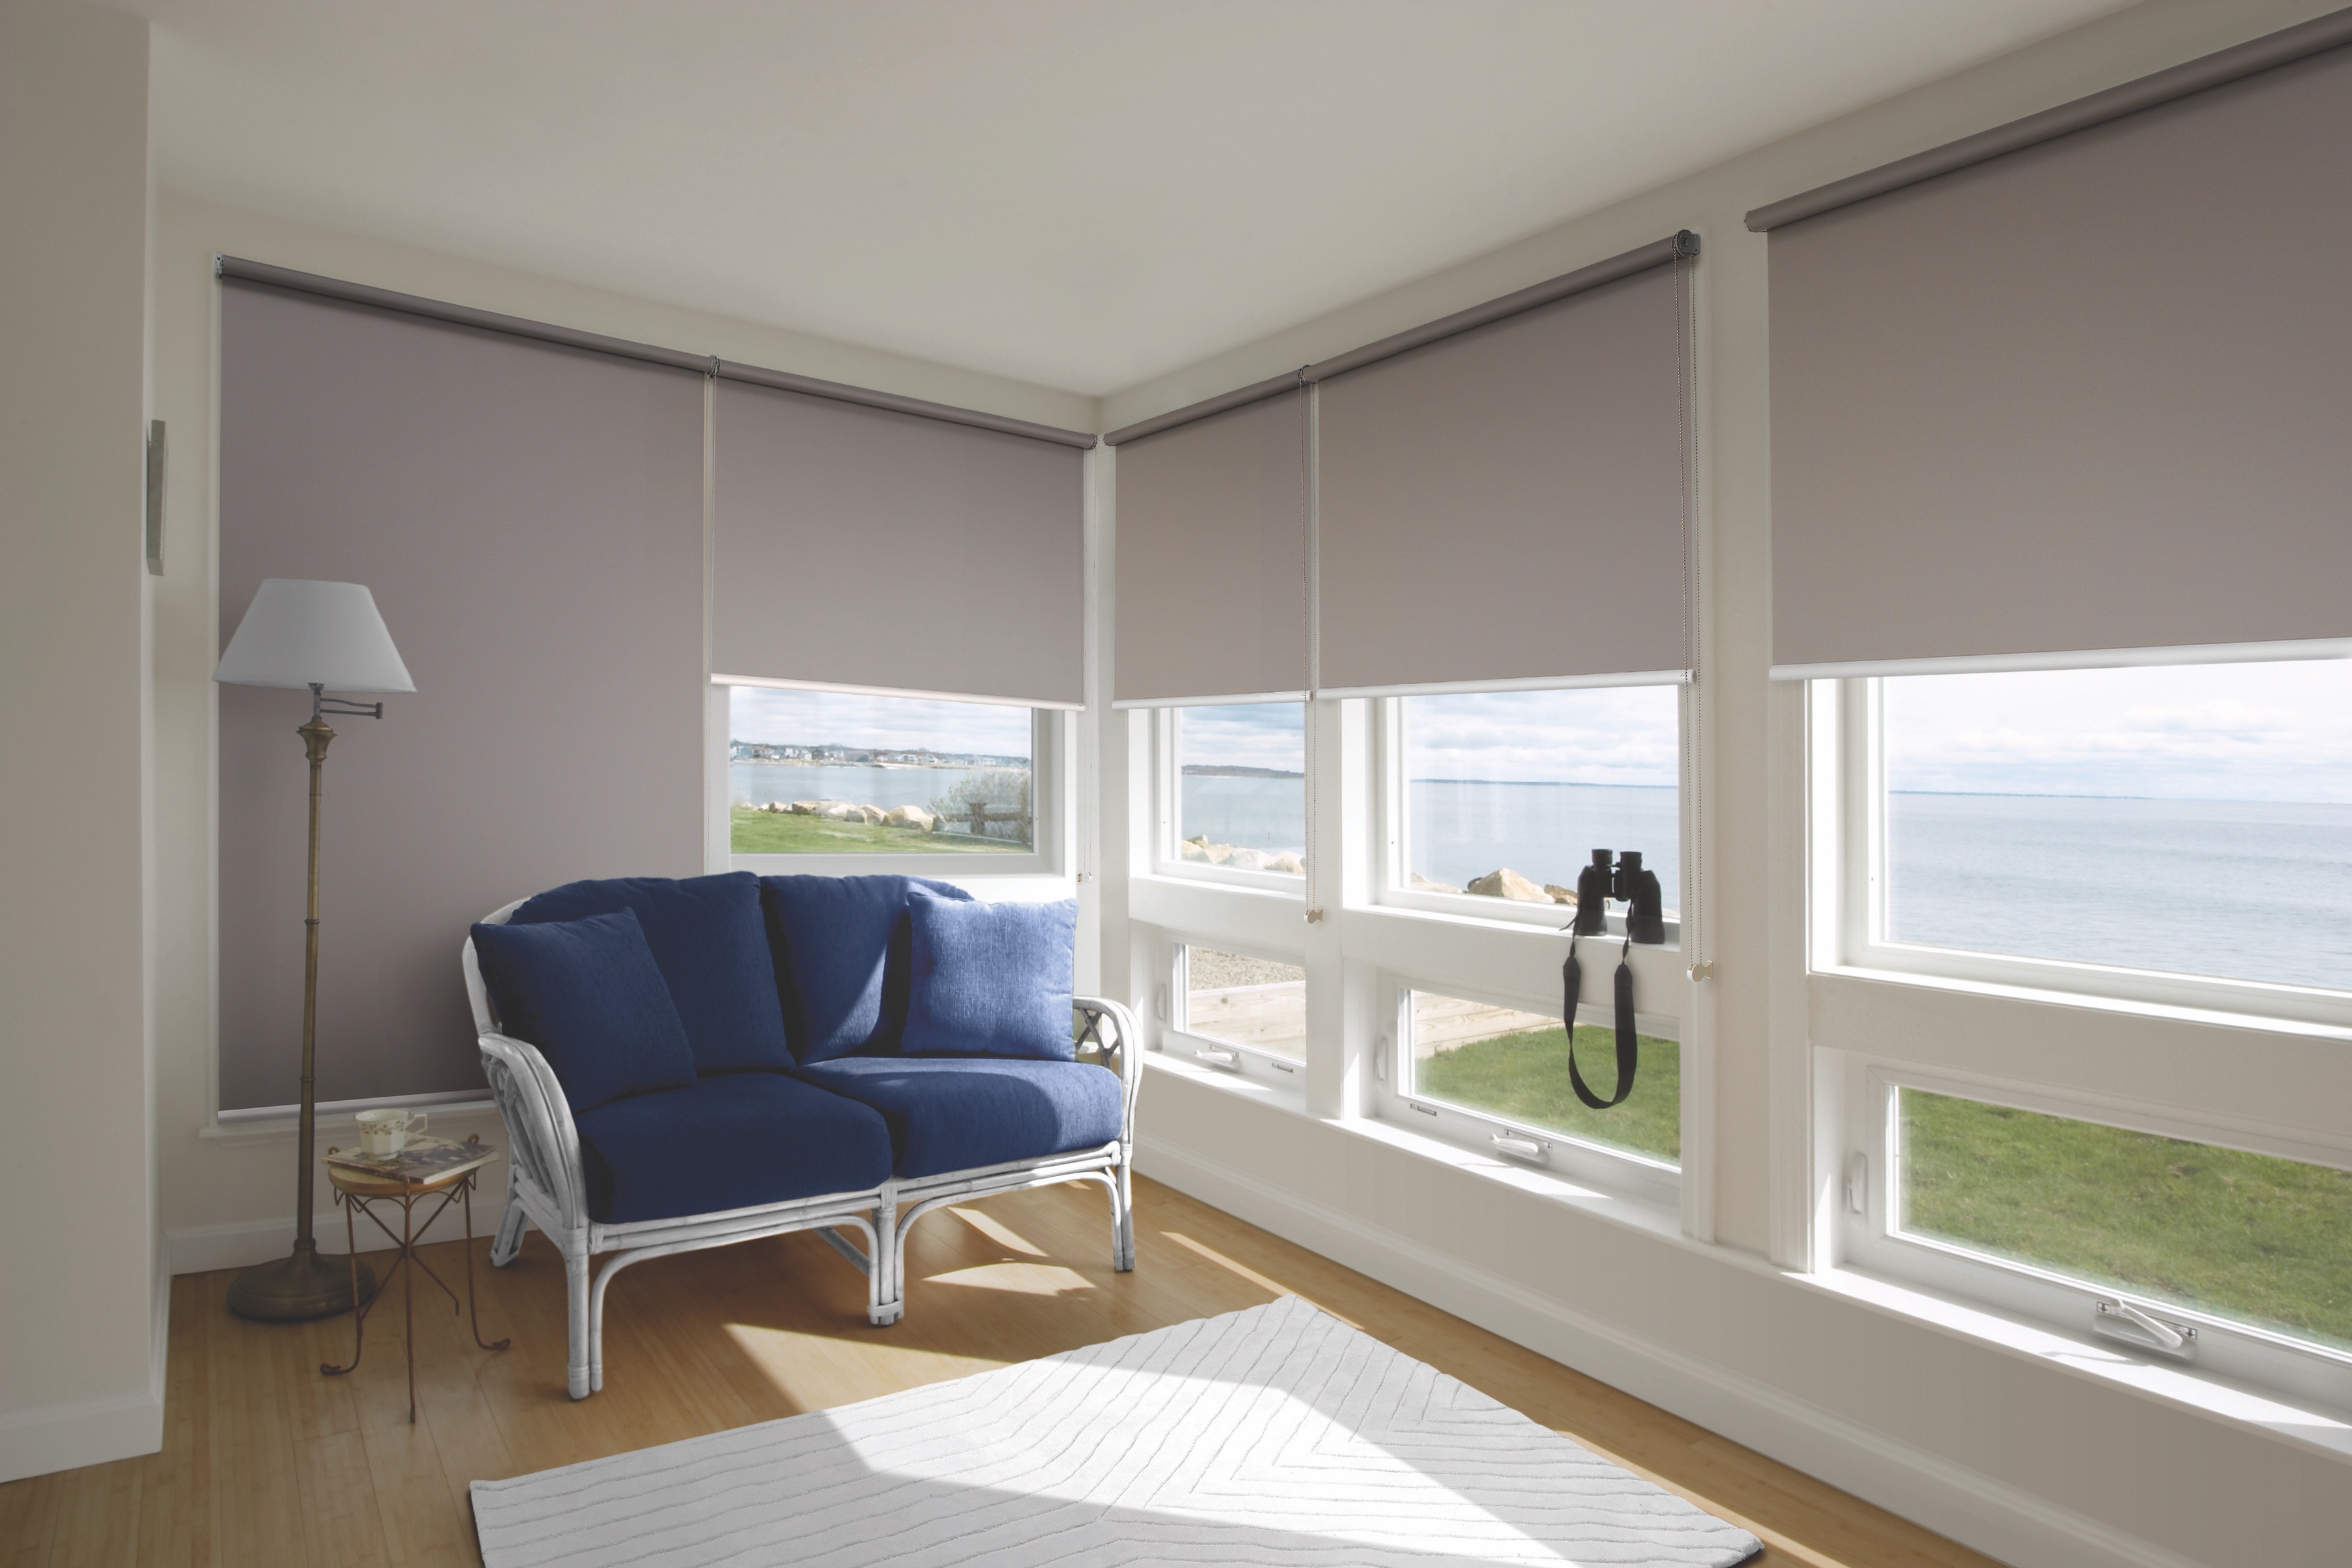 The meticulously designed Roller blinds gives the best protection of sun rays and privacy